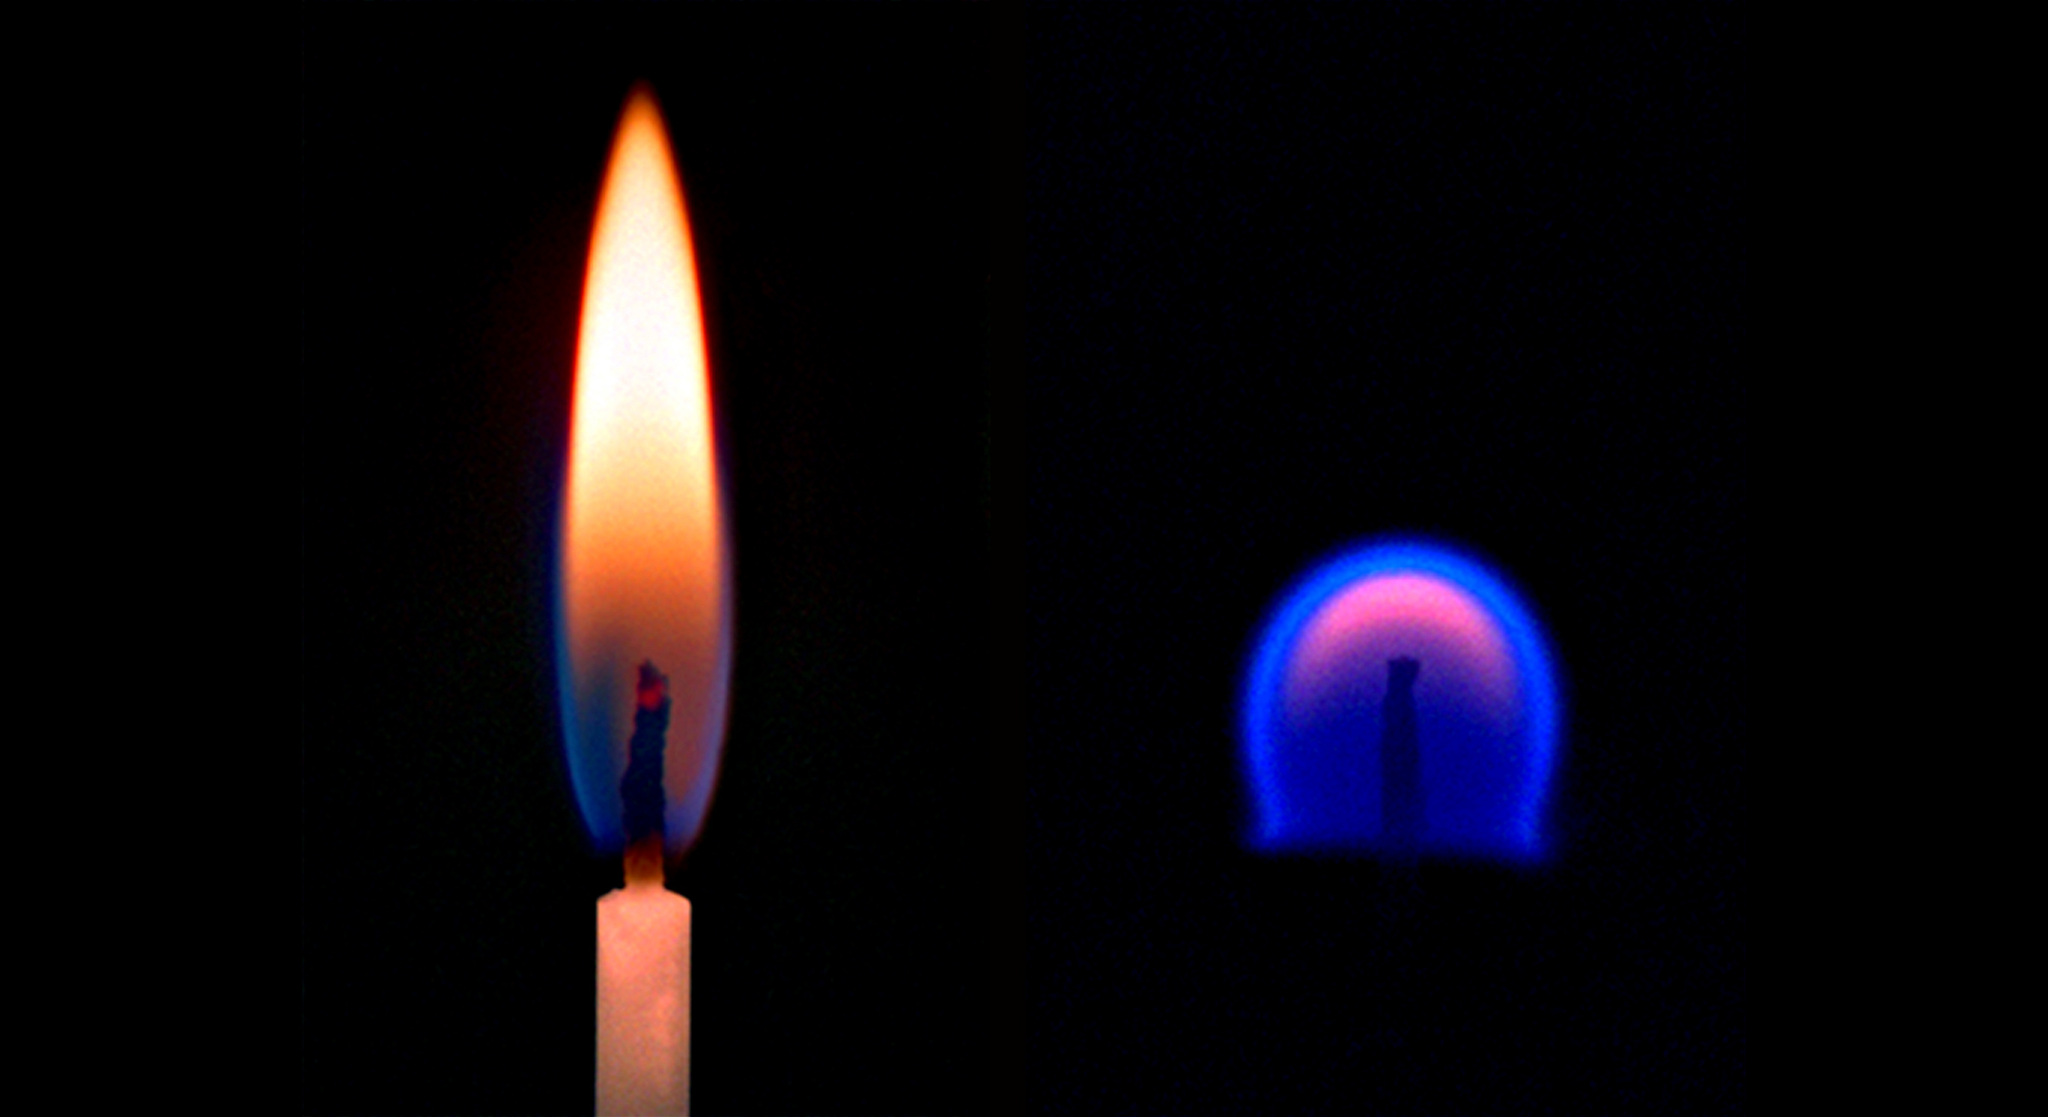 image of two flames side by side for comparison